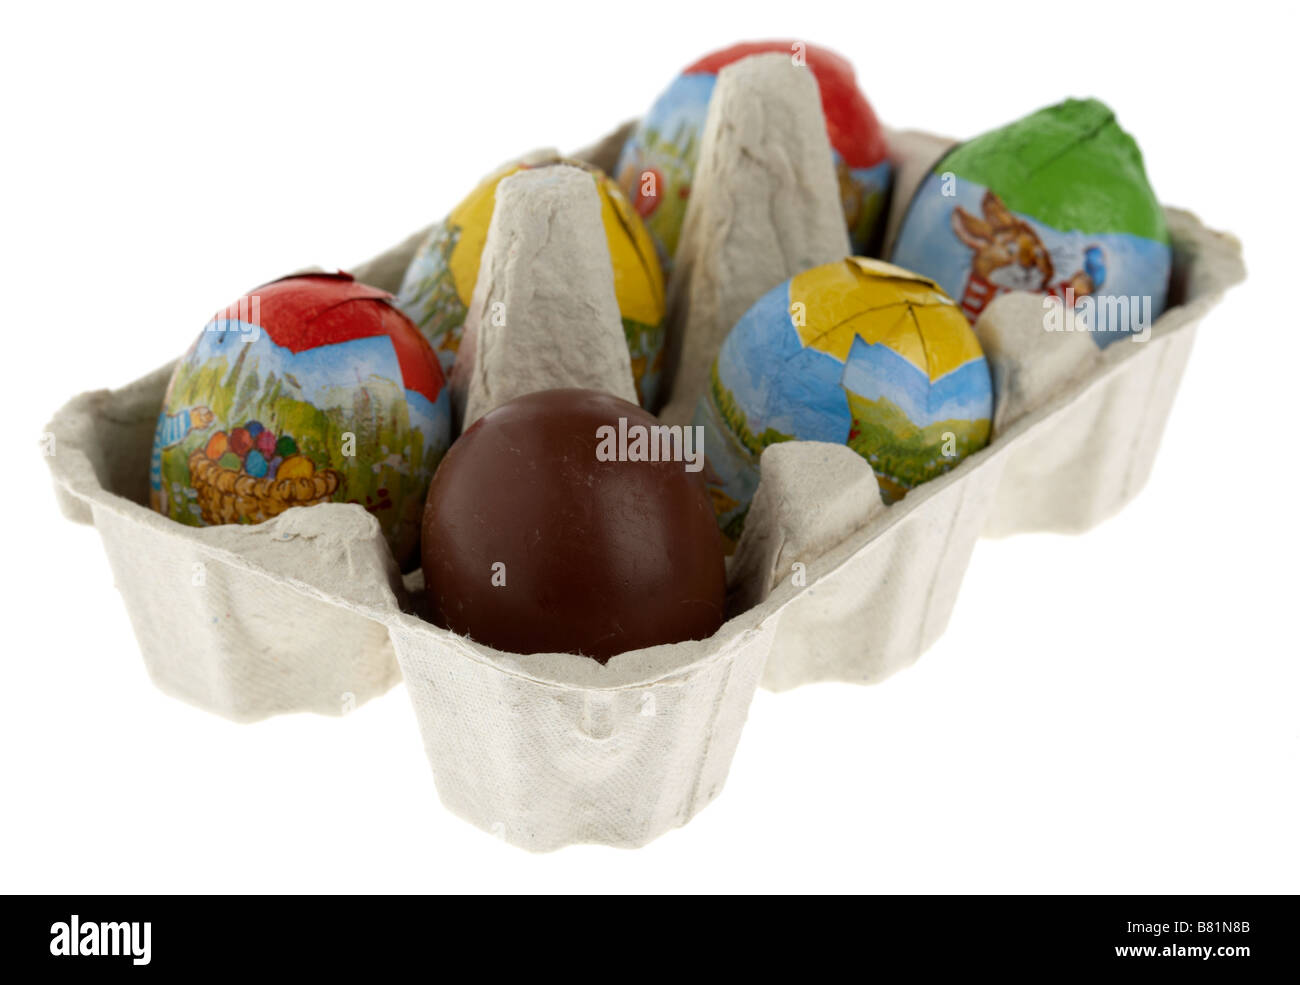 One chocolate mini egg Cut Out Stock Images & Pictures - Alamy